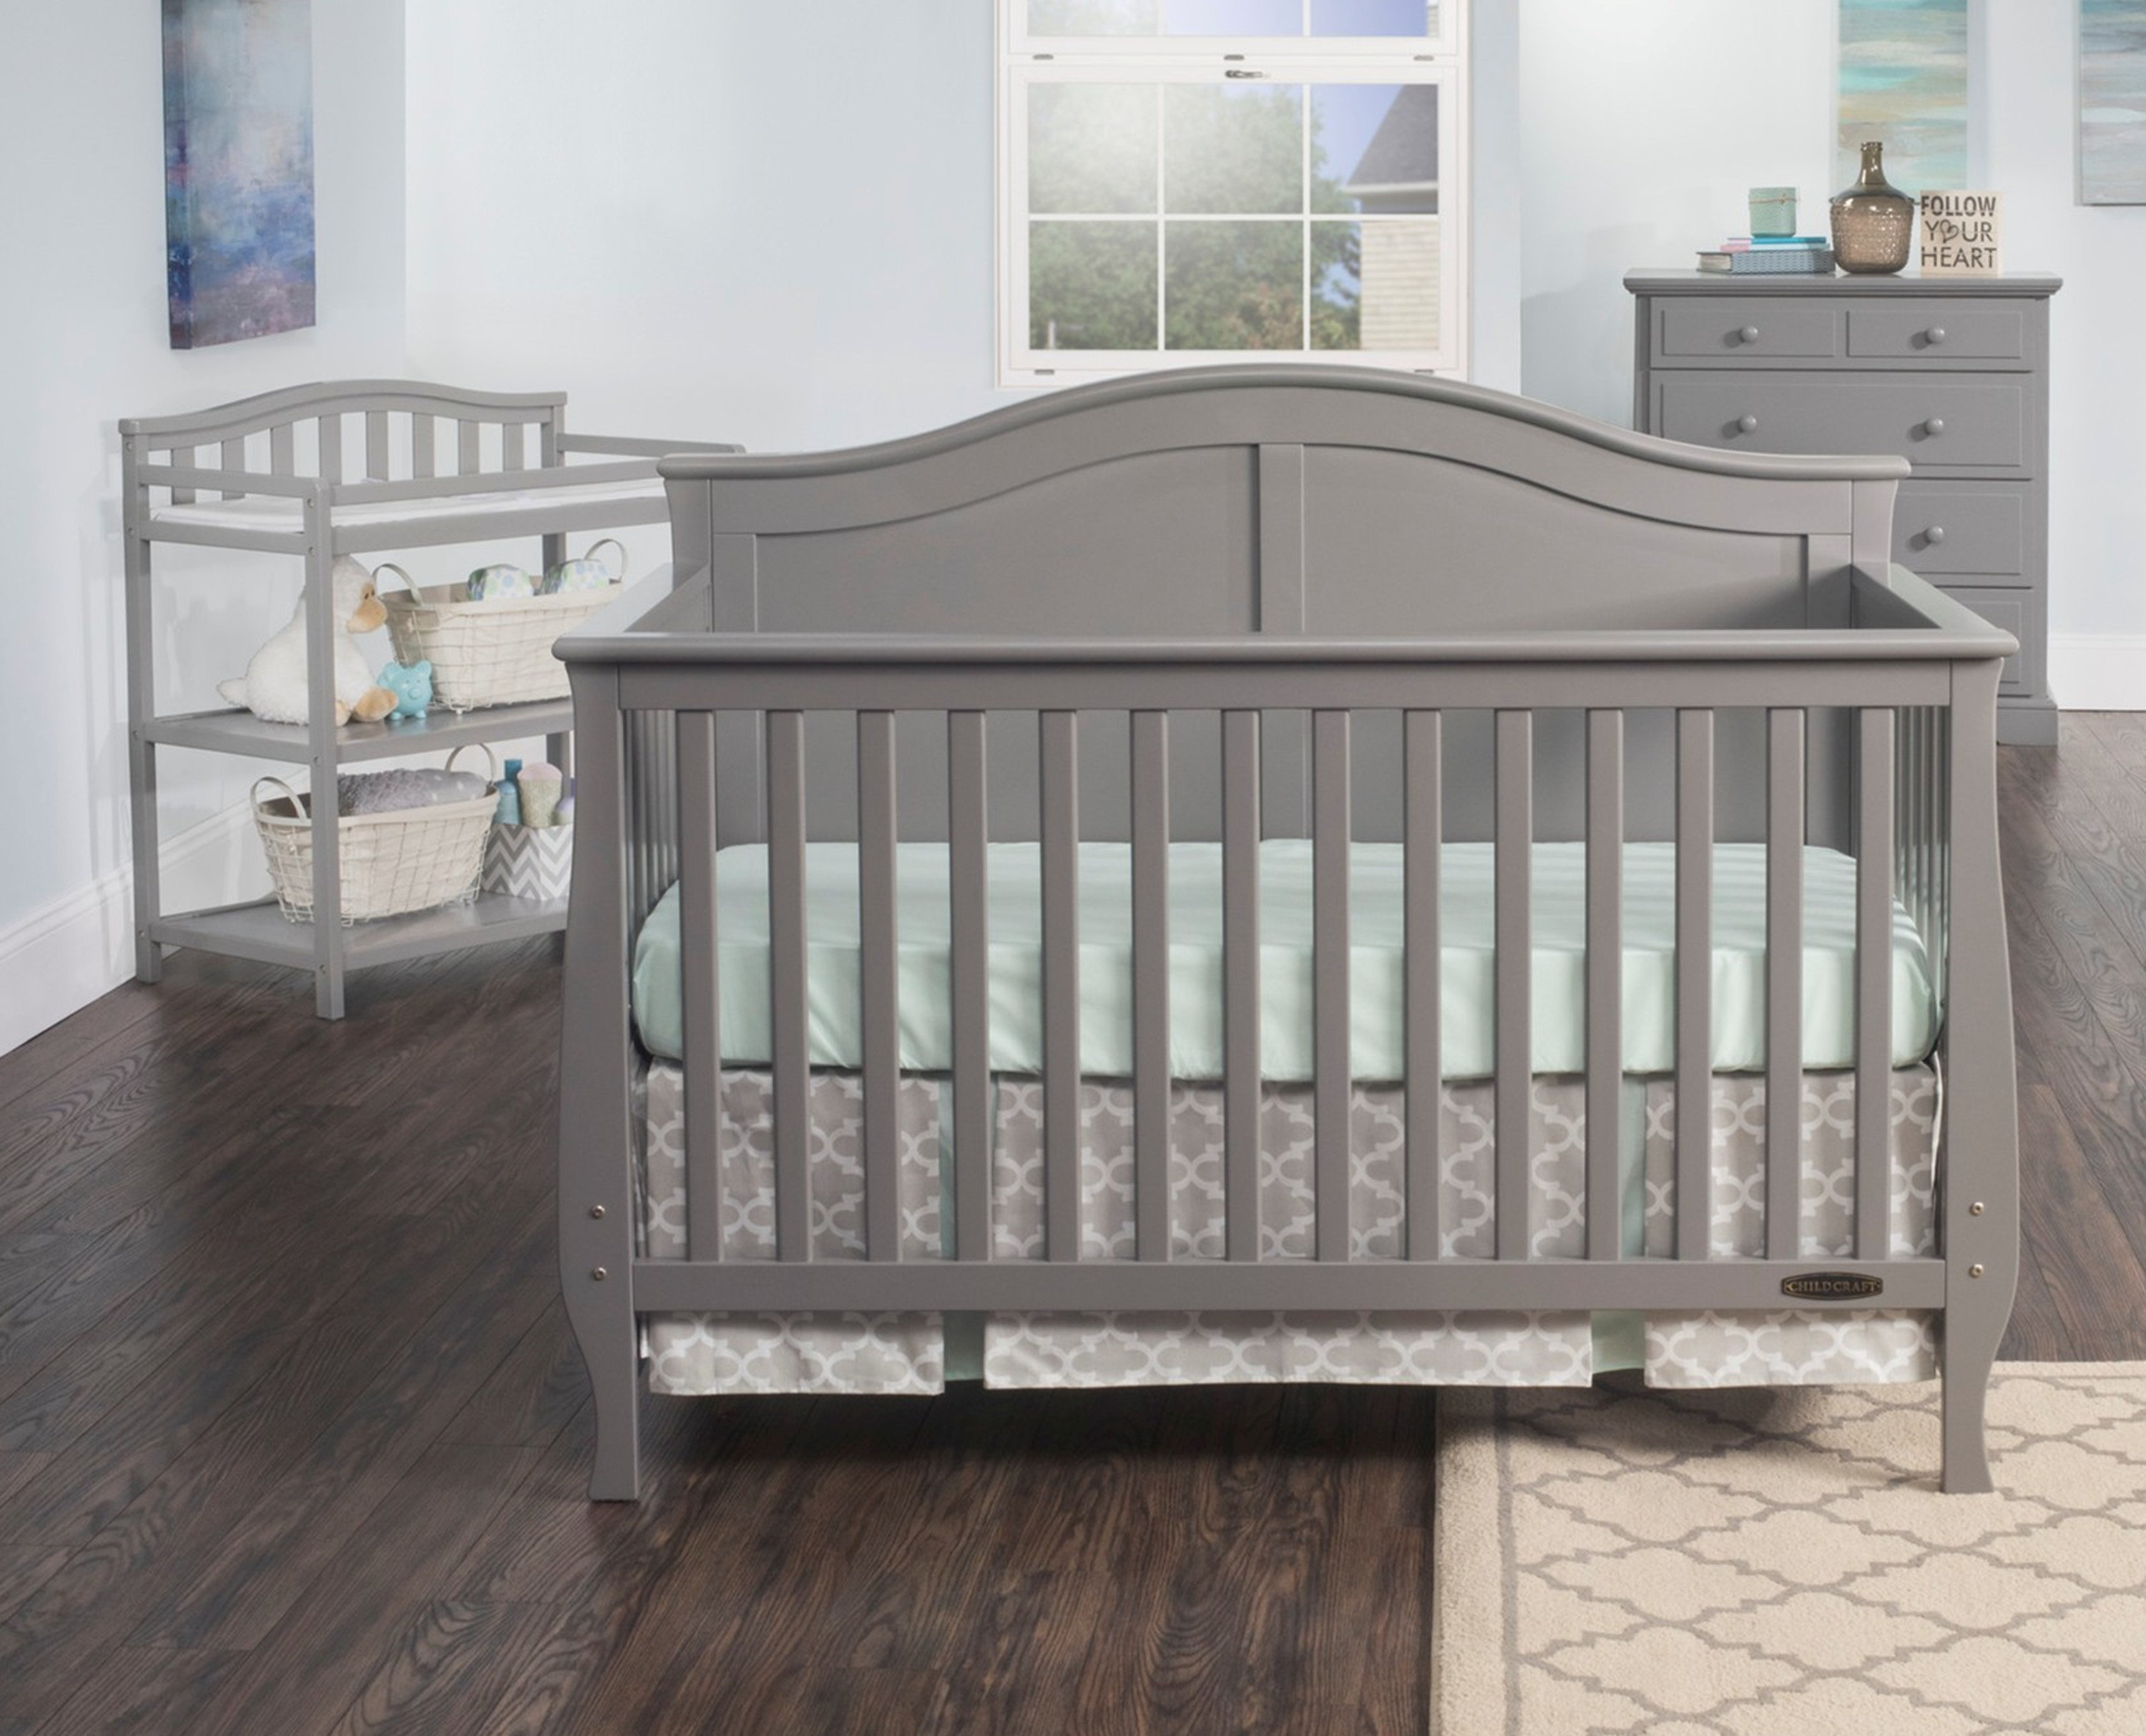 Cribs | Up to 55% Off Through 12/26 